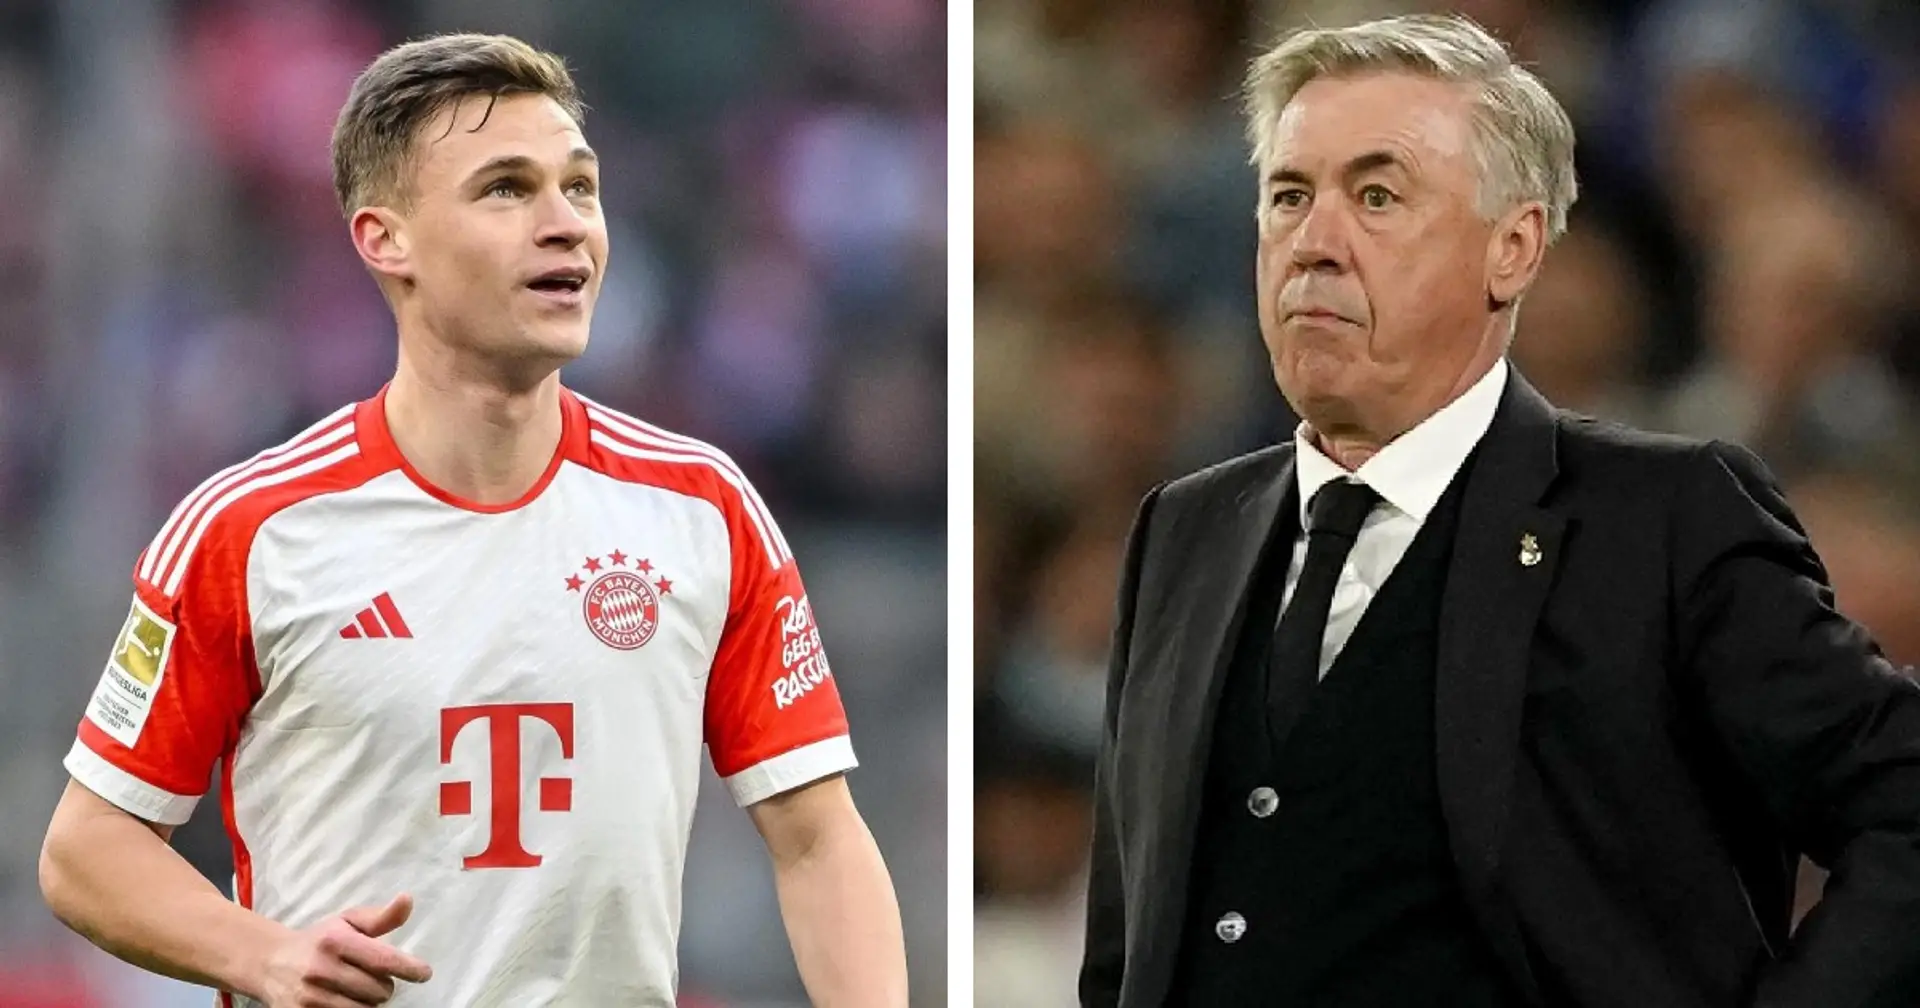 Bayern open to selling Kimmich – midfielder interested in joining Real Madrid: Sky Germany